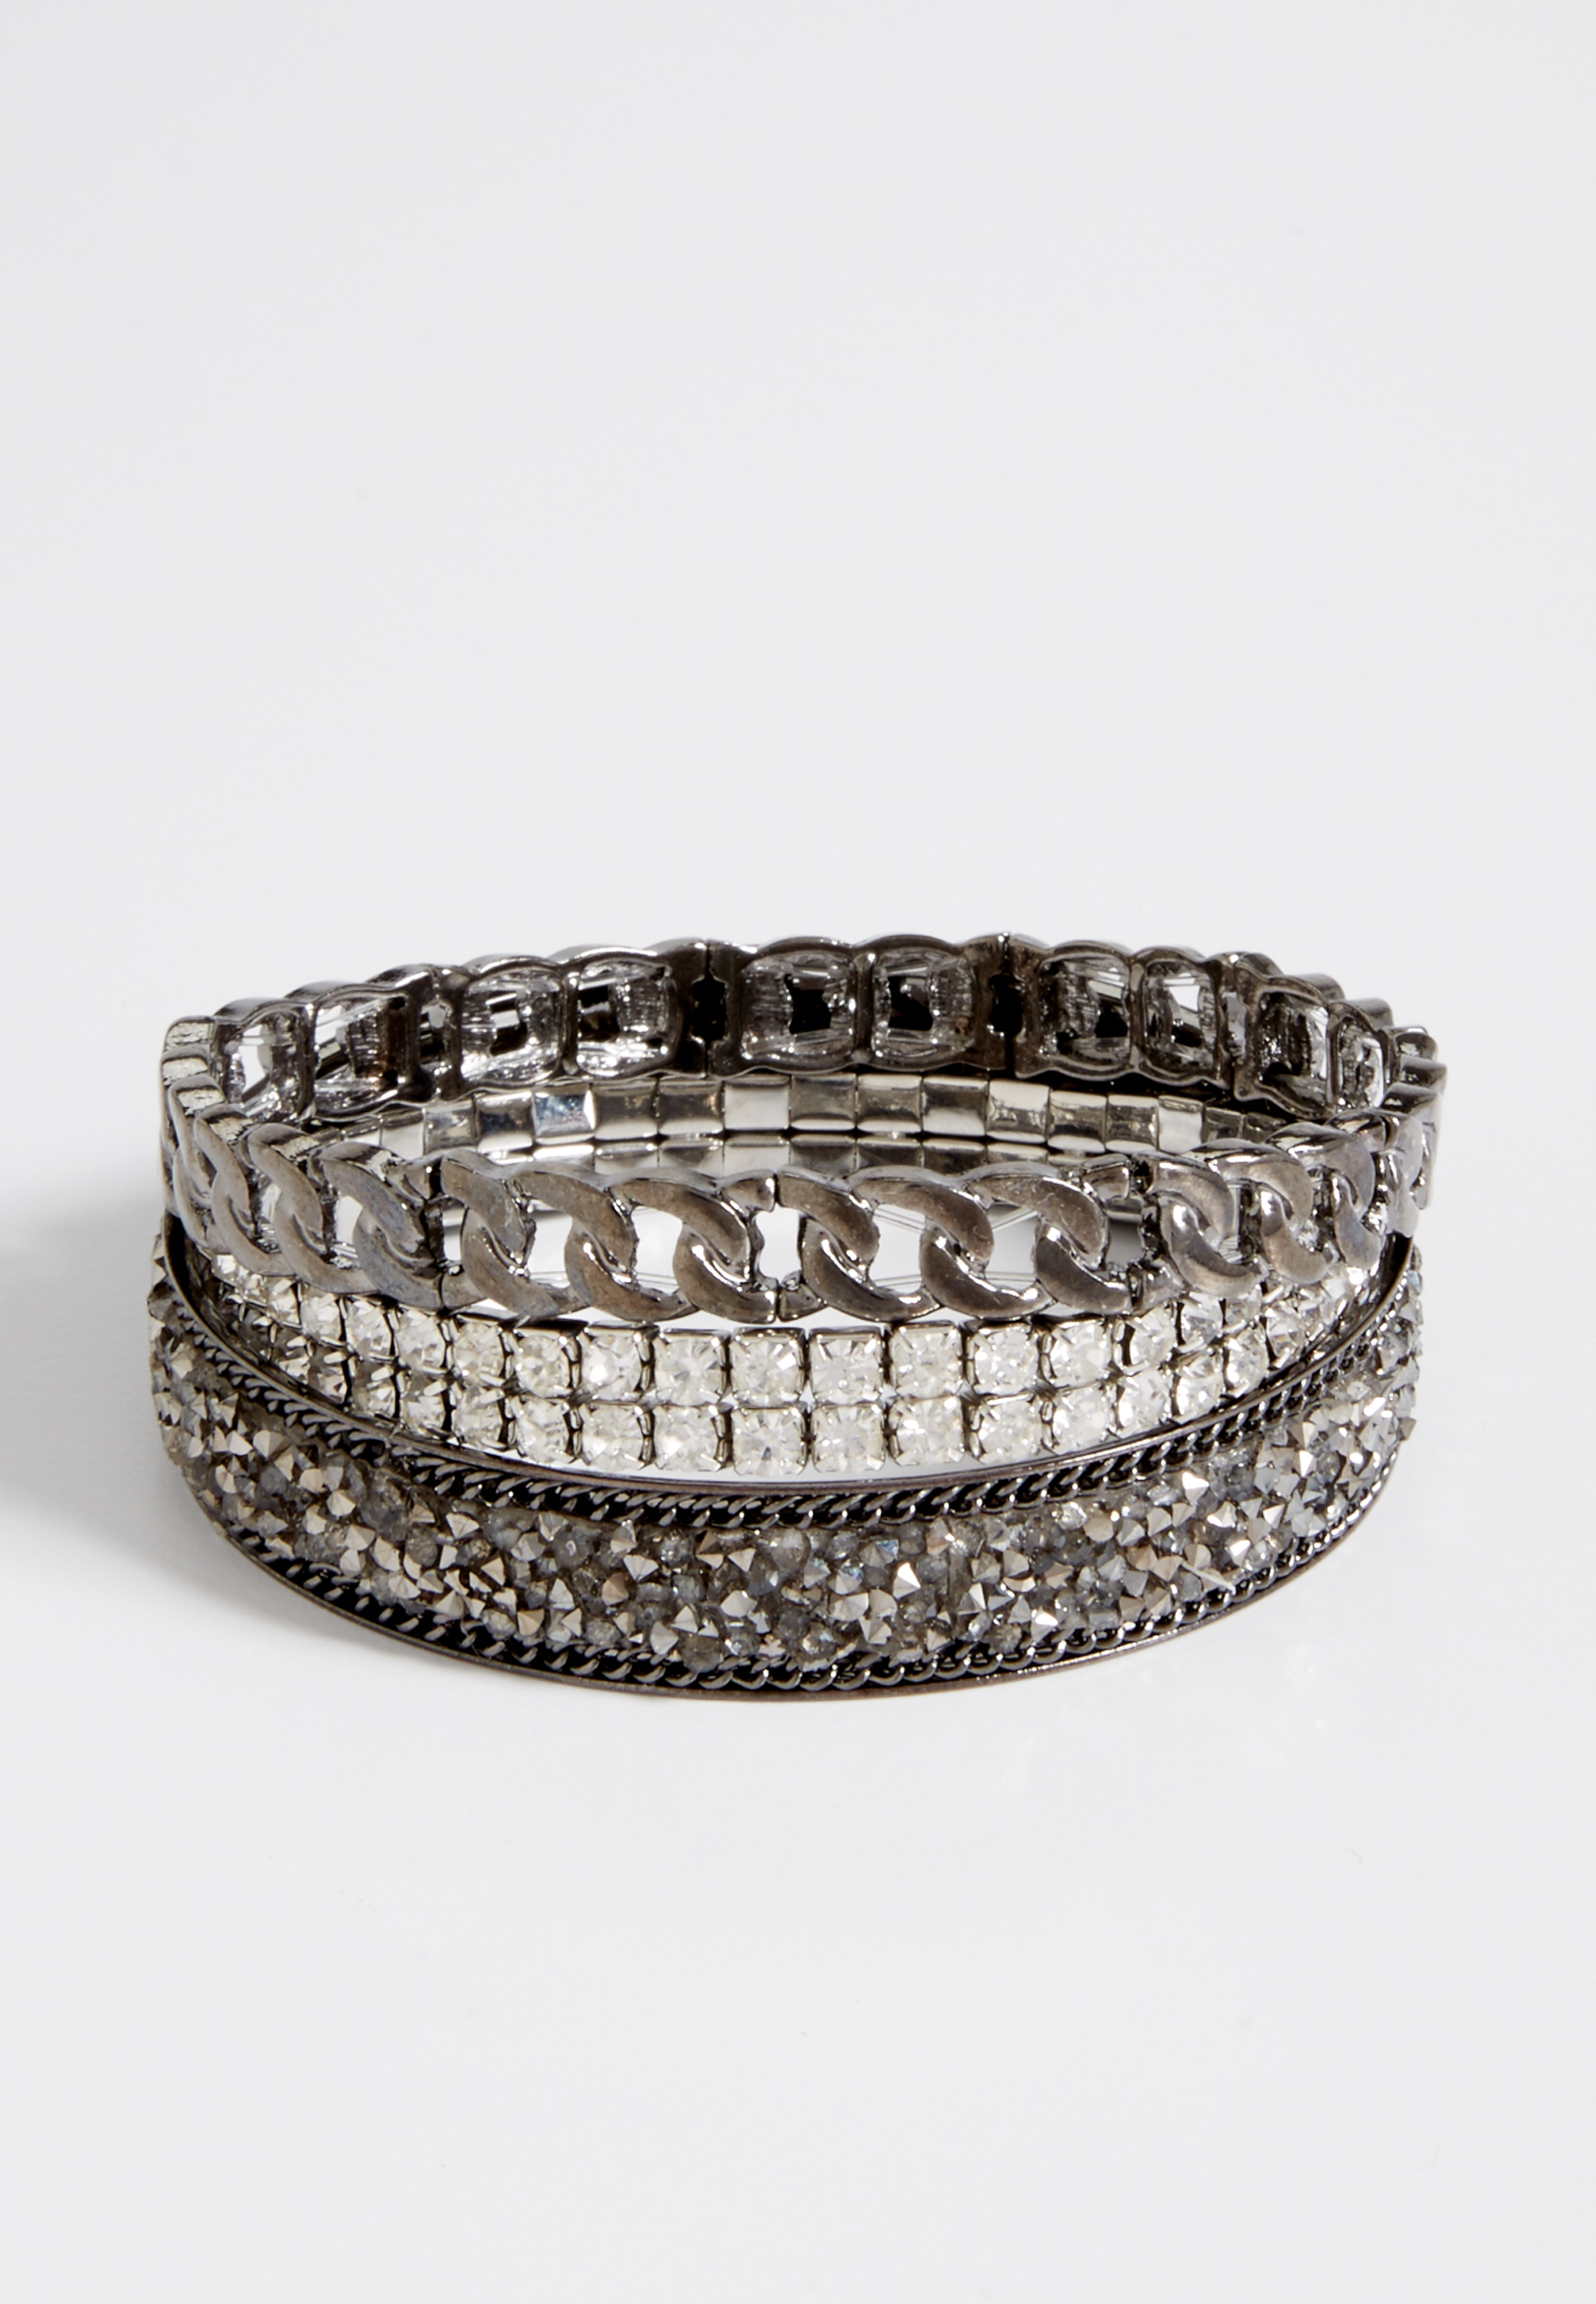 bangle and stretch bracelet set with rhinestones | maurices